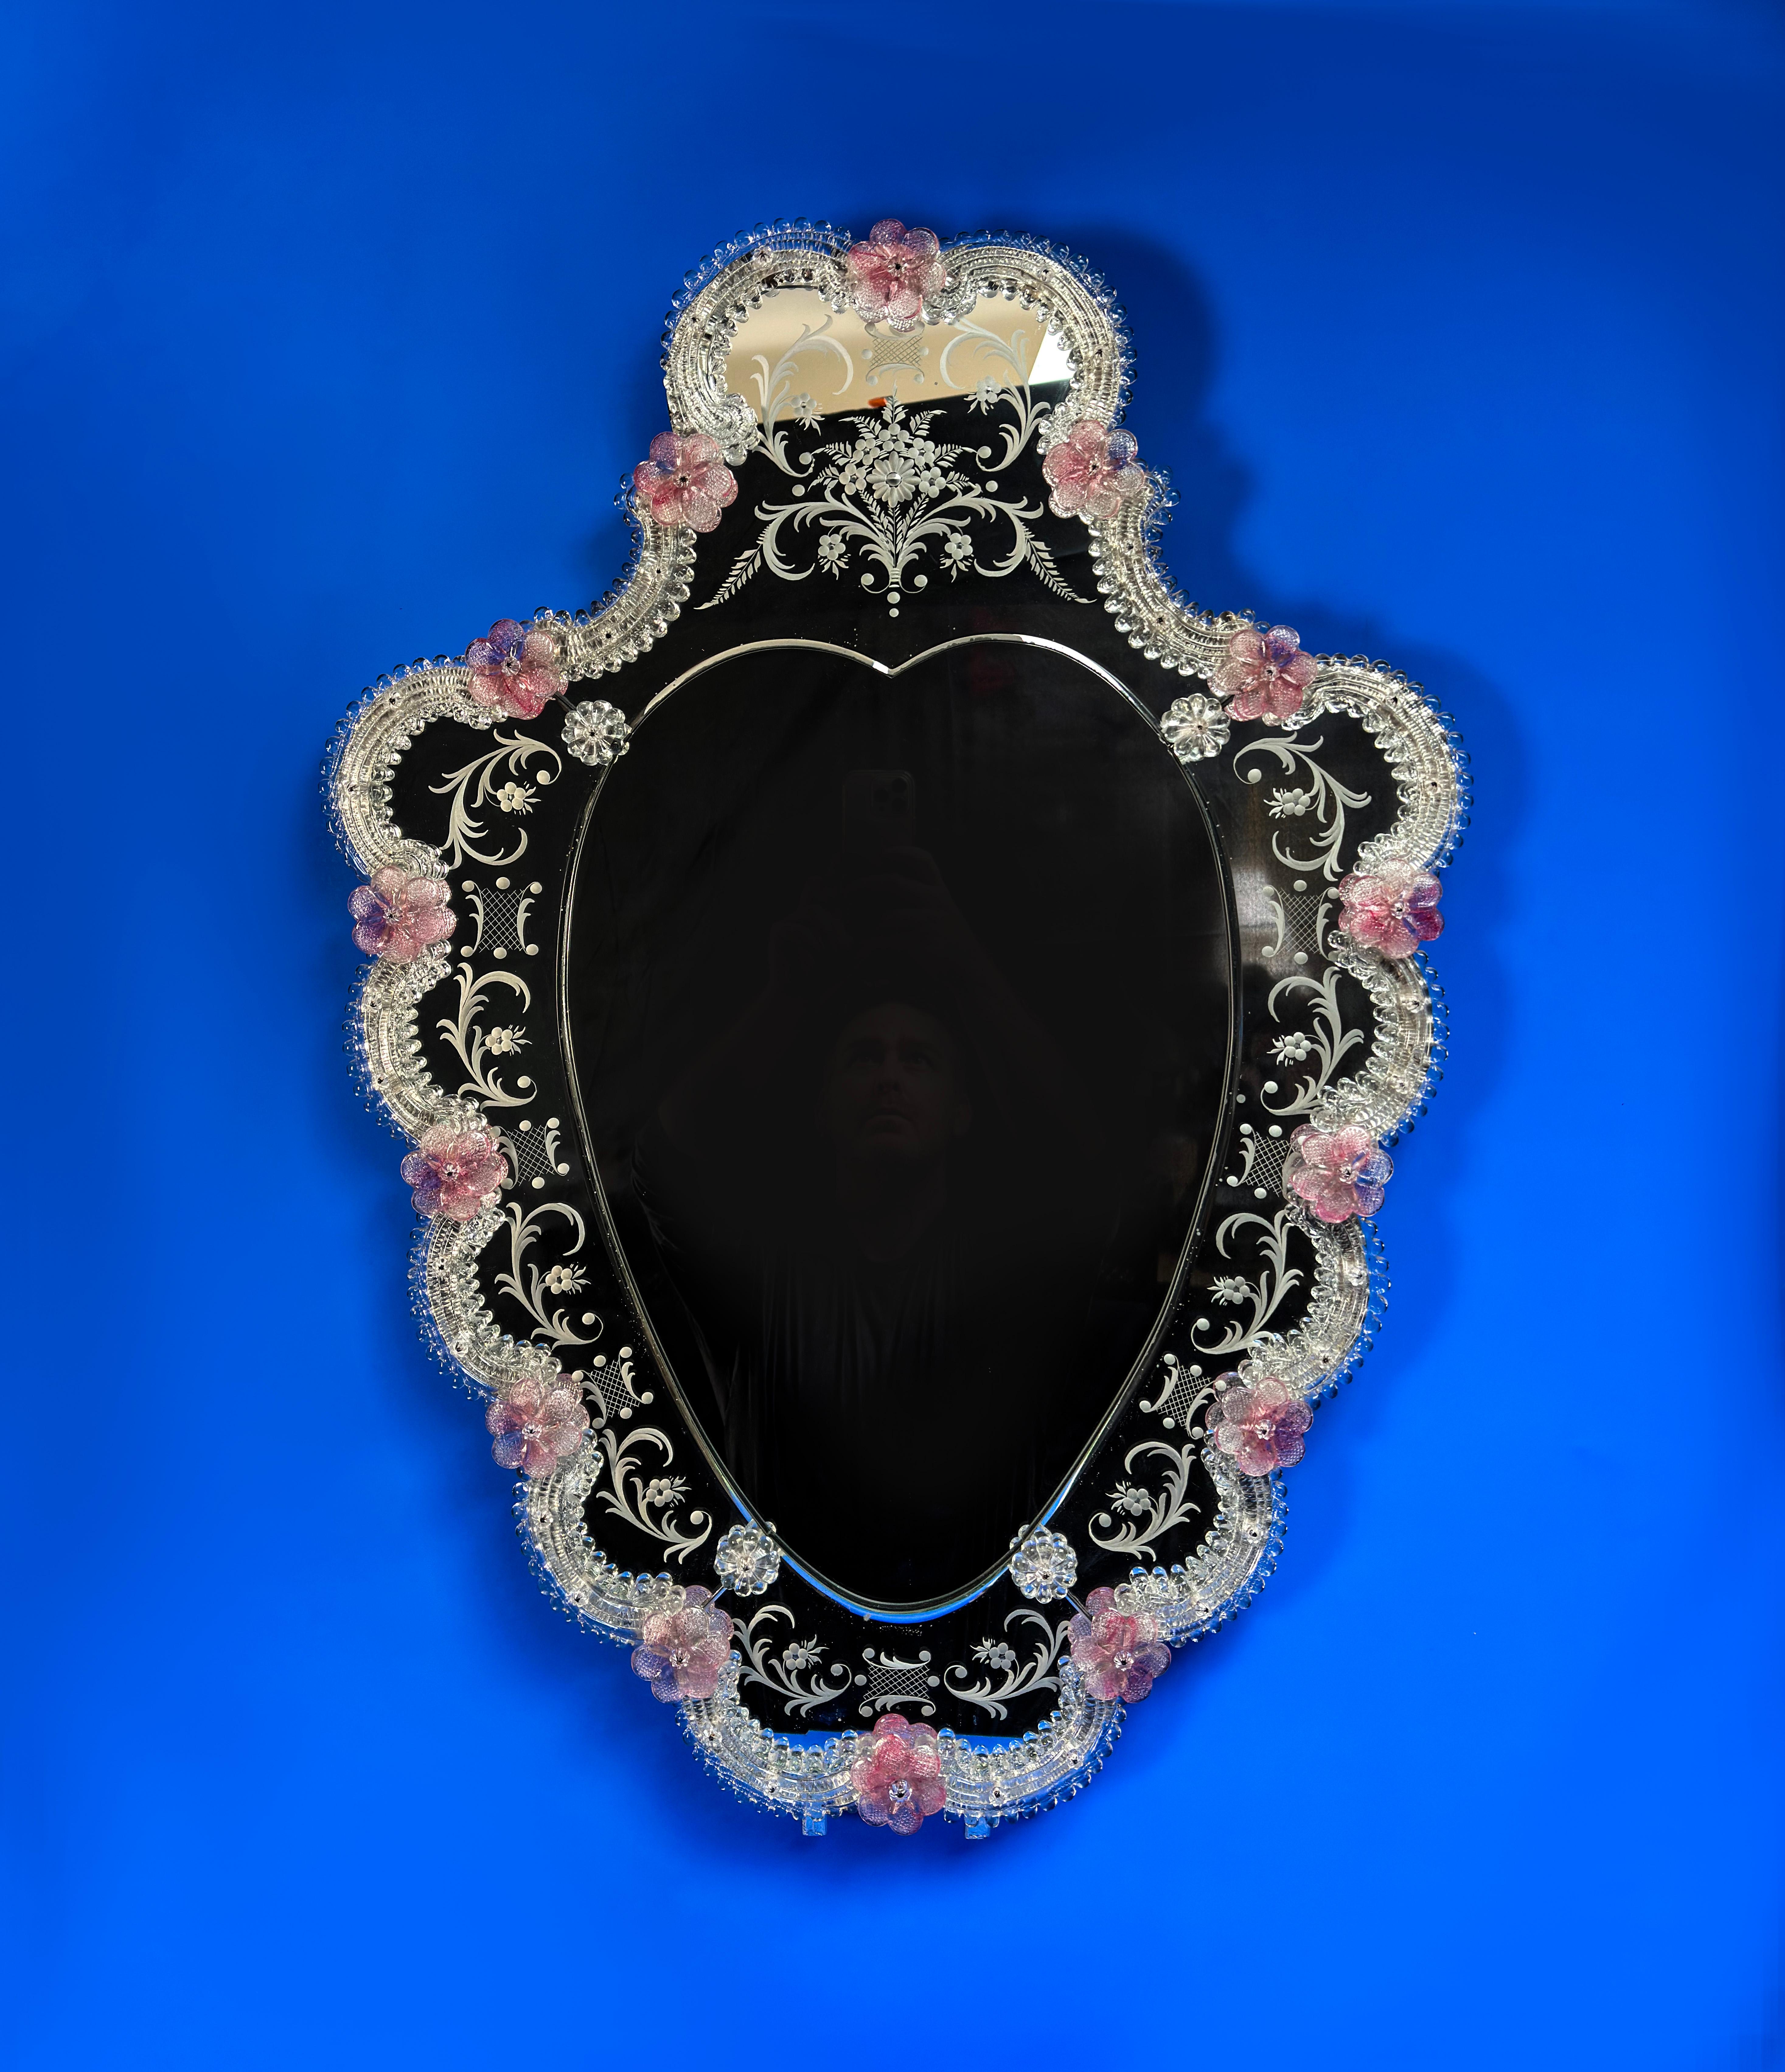 A beautiful shield shaped Venetian Mirror, crafted in Venice in the 1960s

It shows and array of delicate decoration and embellishment. The outer mirrored panel finely etched with an array of rococo style scrolls. Encircling this is the sparkling